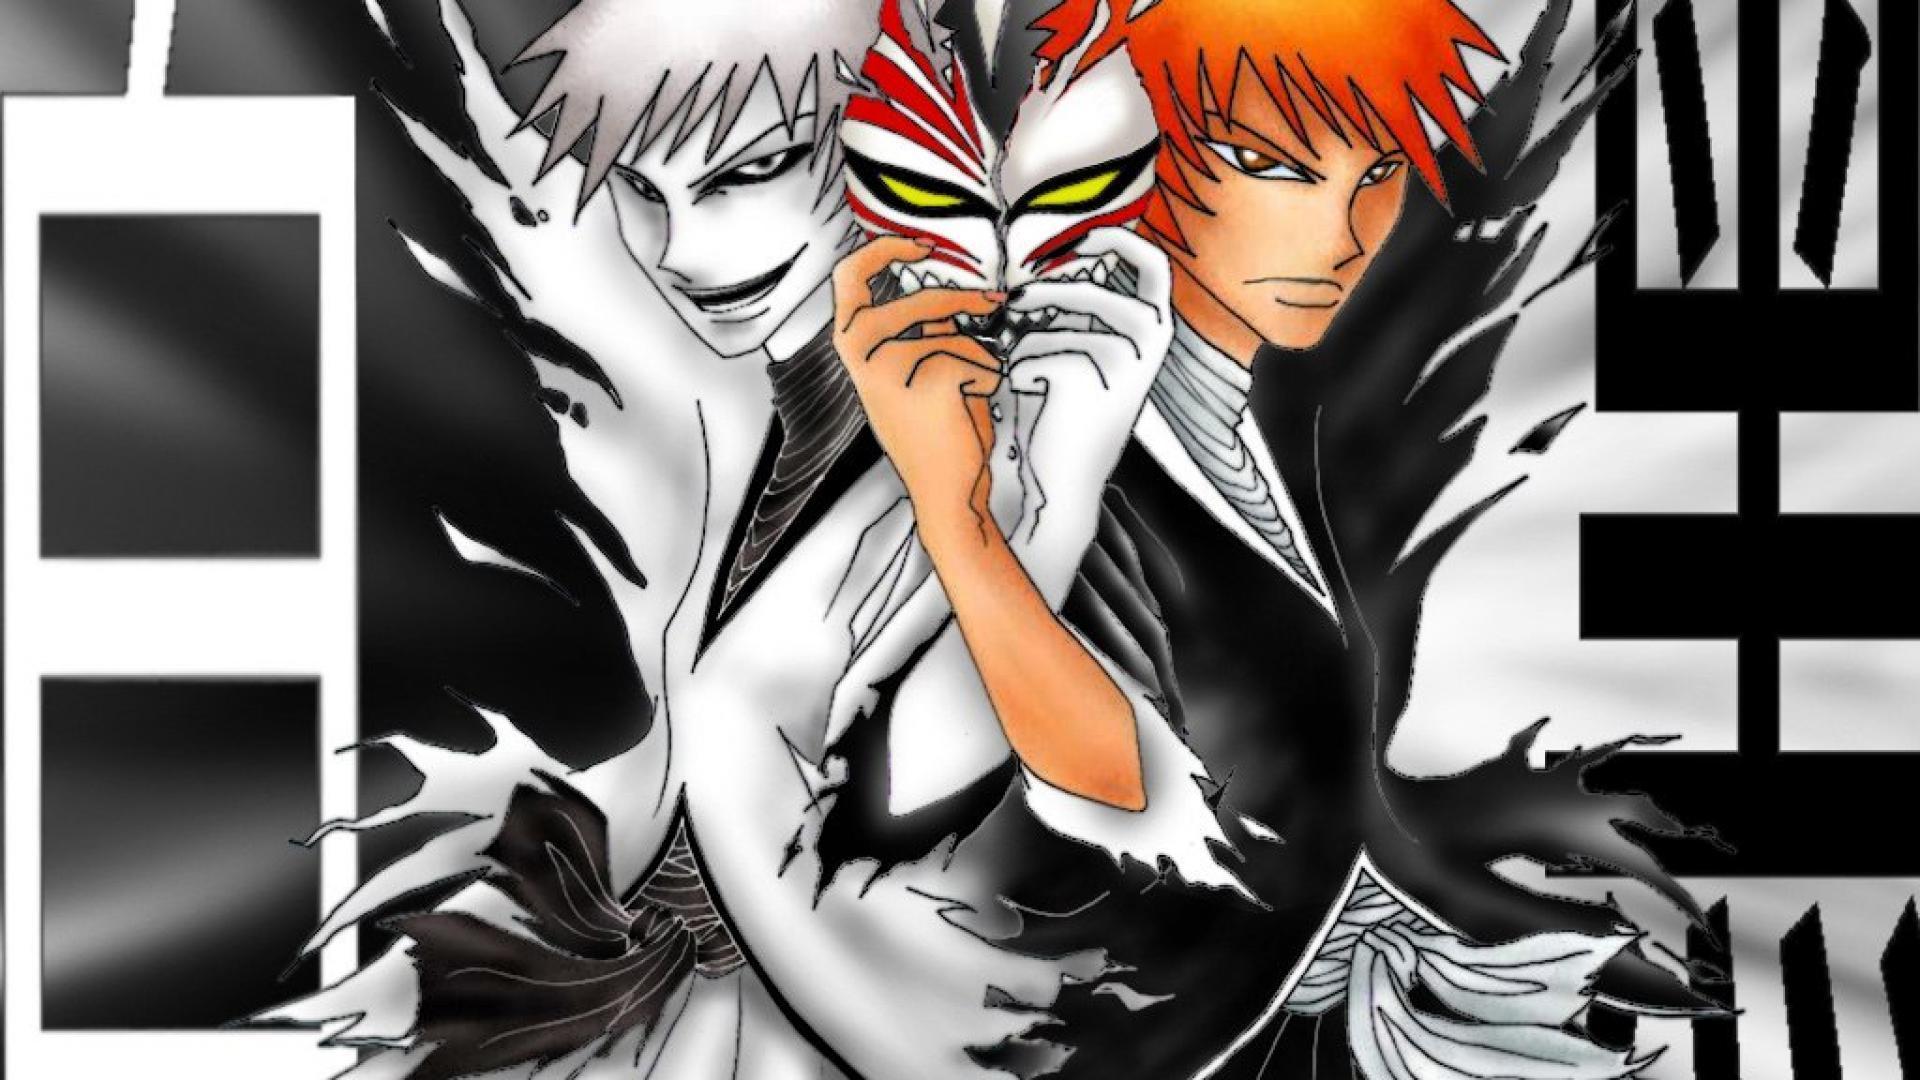 Bleach Anime Wallpapers - Wallpaper Cave